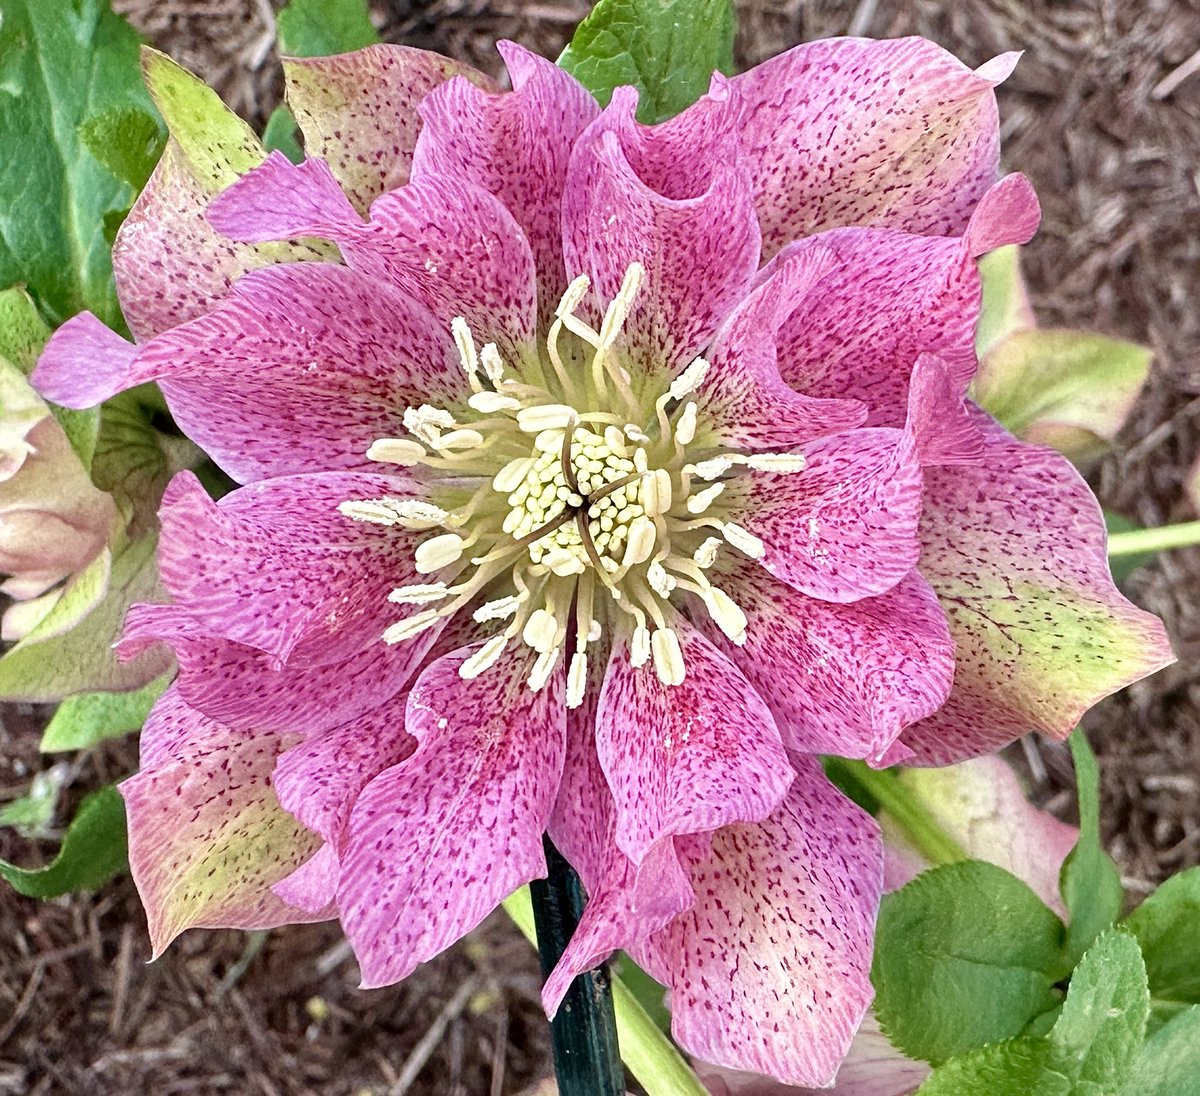 A perfect name for a perfect bloom 💕Hellebore ‘Double Pink’ 🌸#Flowers #Gardening #Helleboreheaven